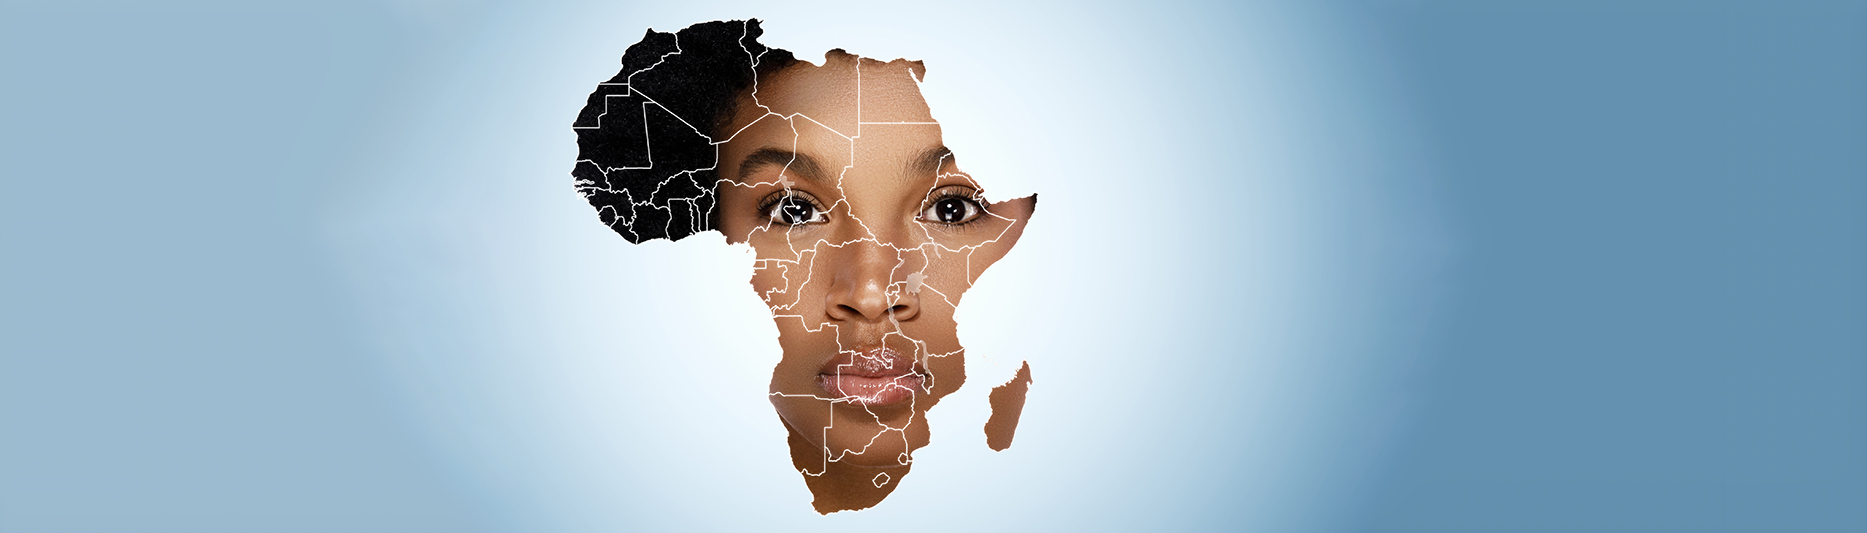 The African continent | Post COVID-19